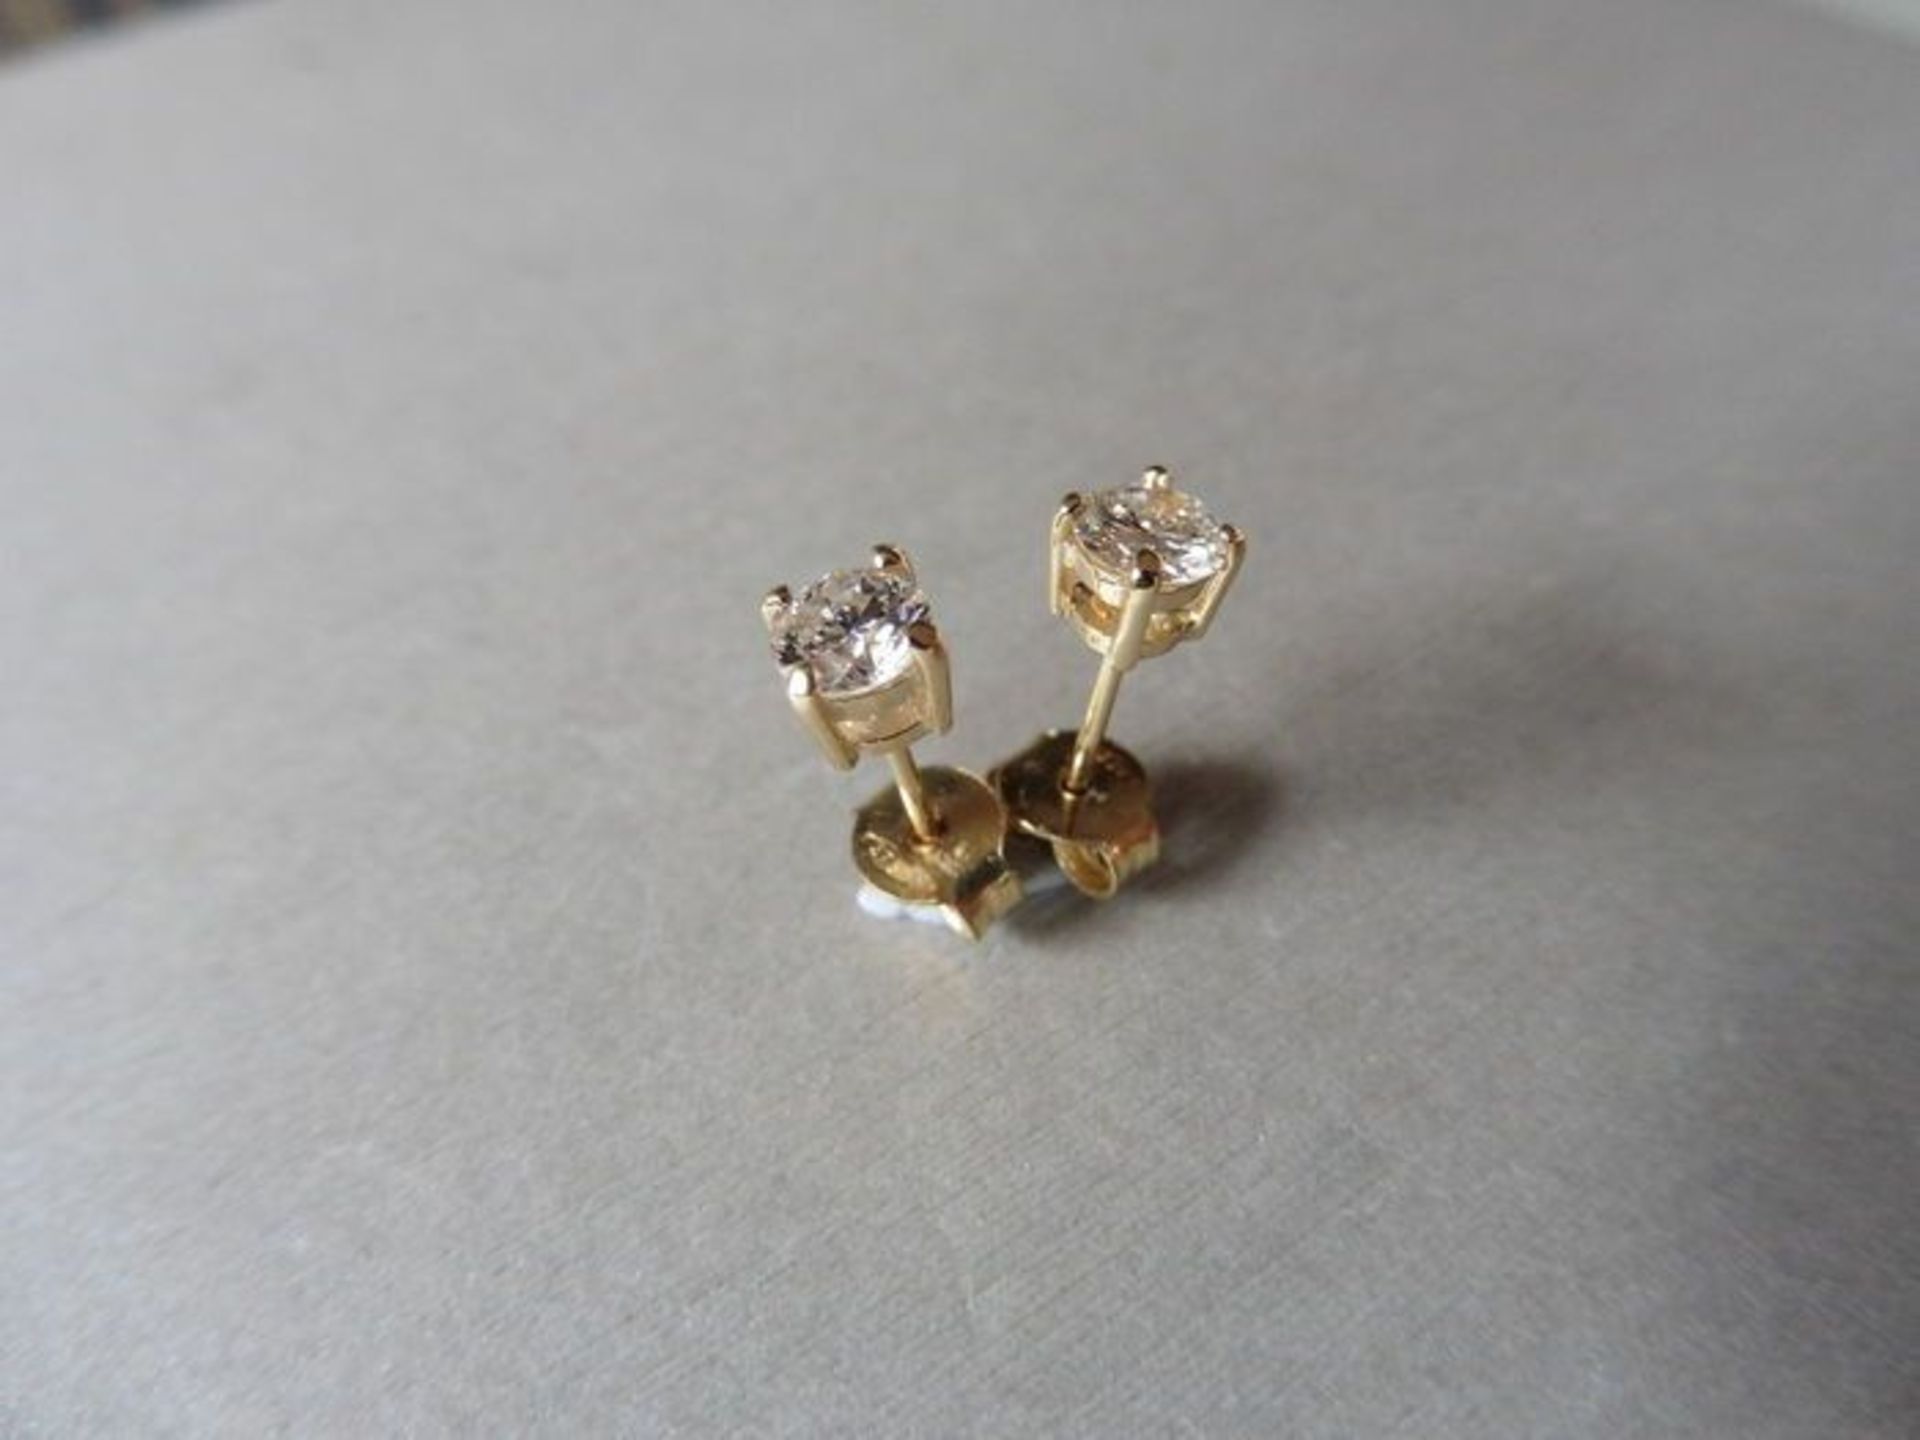 0.50ct Solitaire diamond stud earrings set with brilliant cut diamonds, SI2 clarity and I colour.